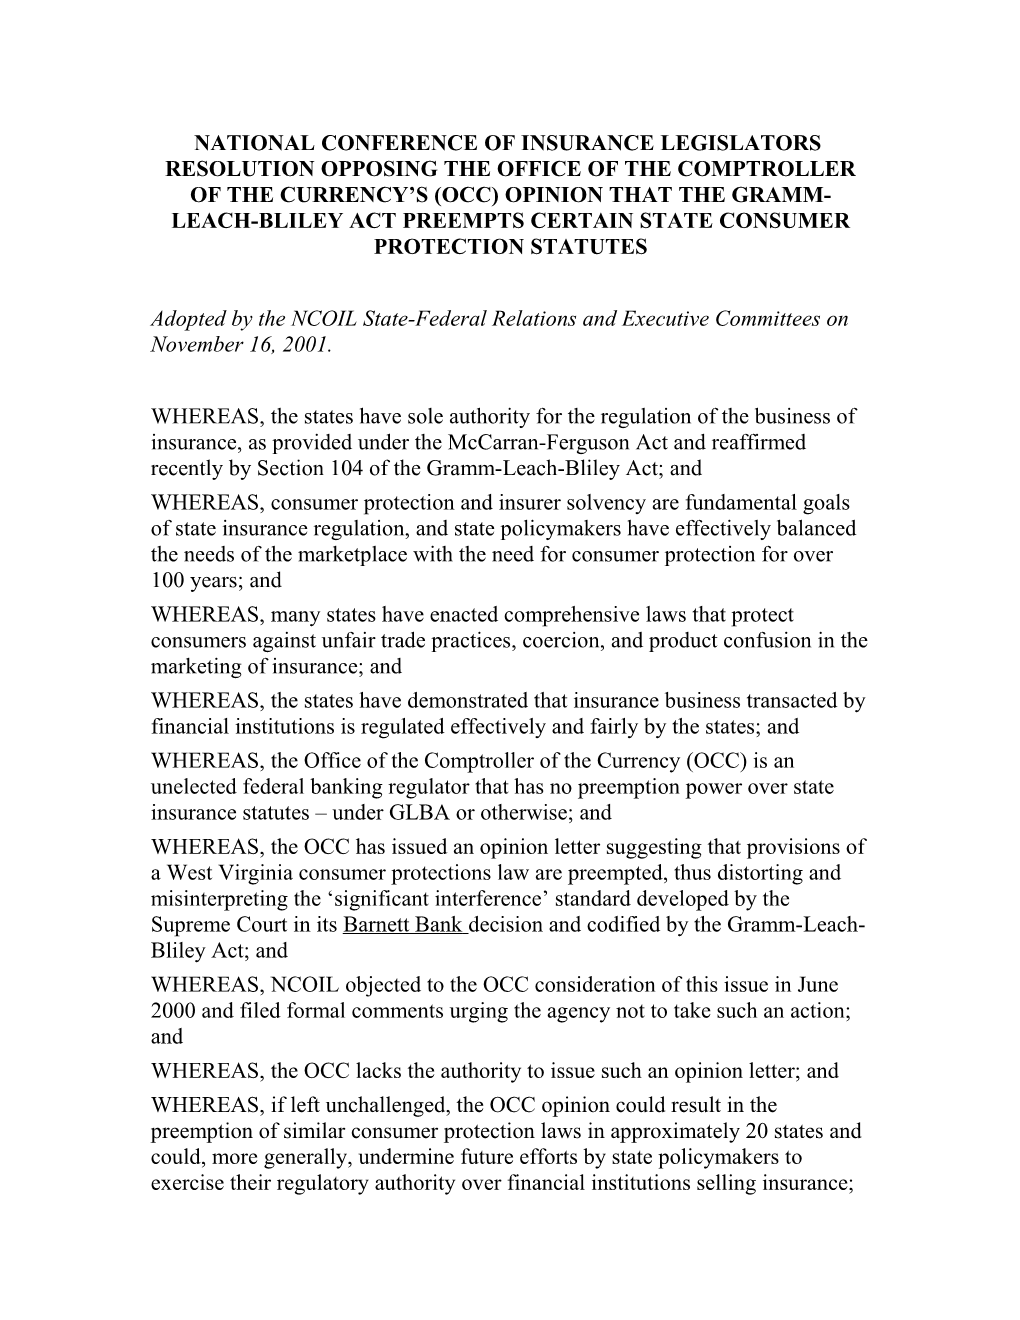 National Conference of Insurance Legislators Resolution Opposing the Office of the Comptroller